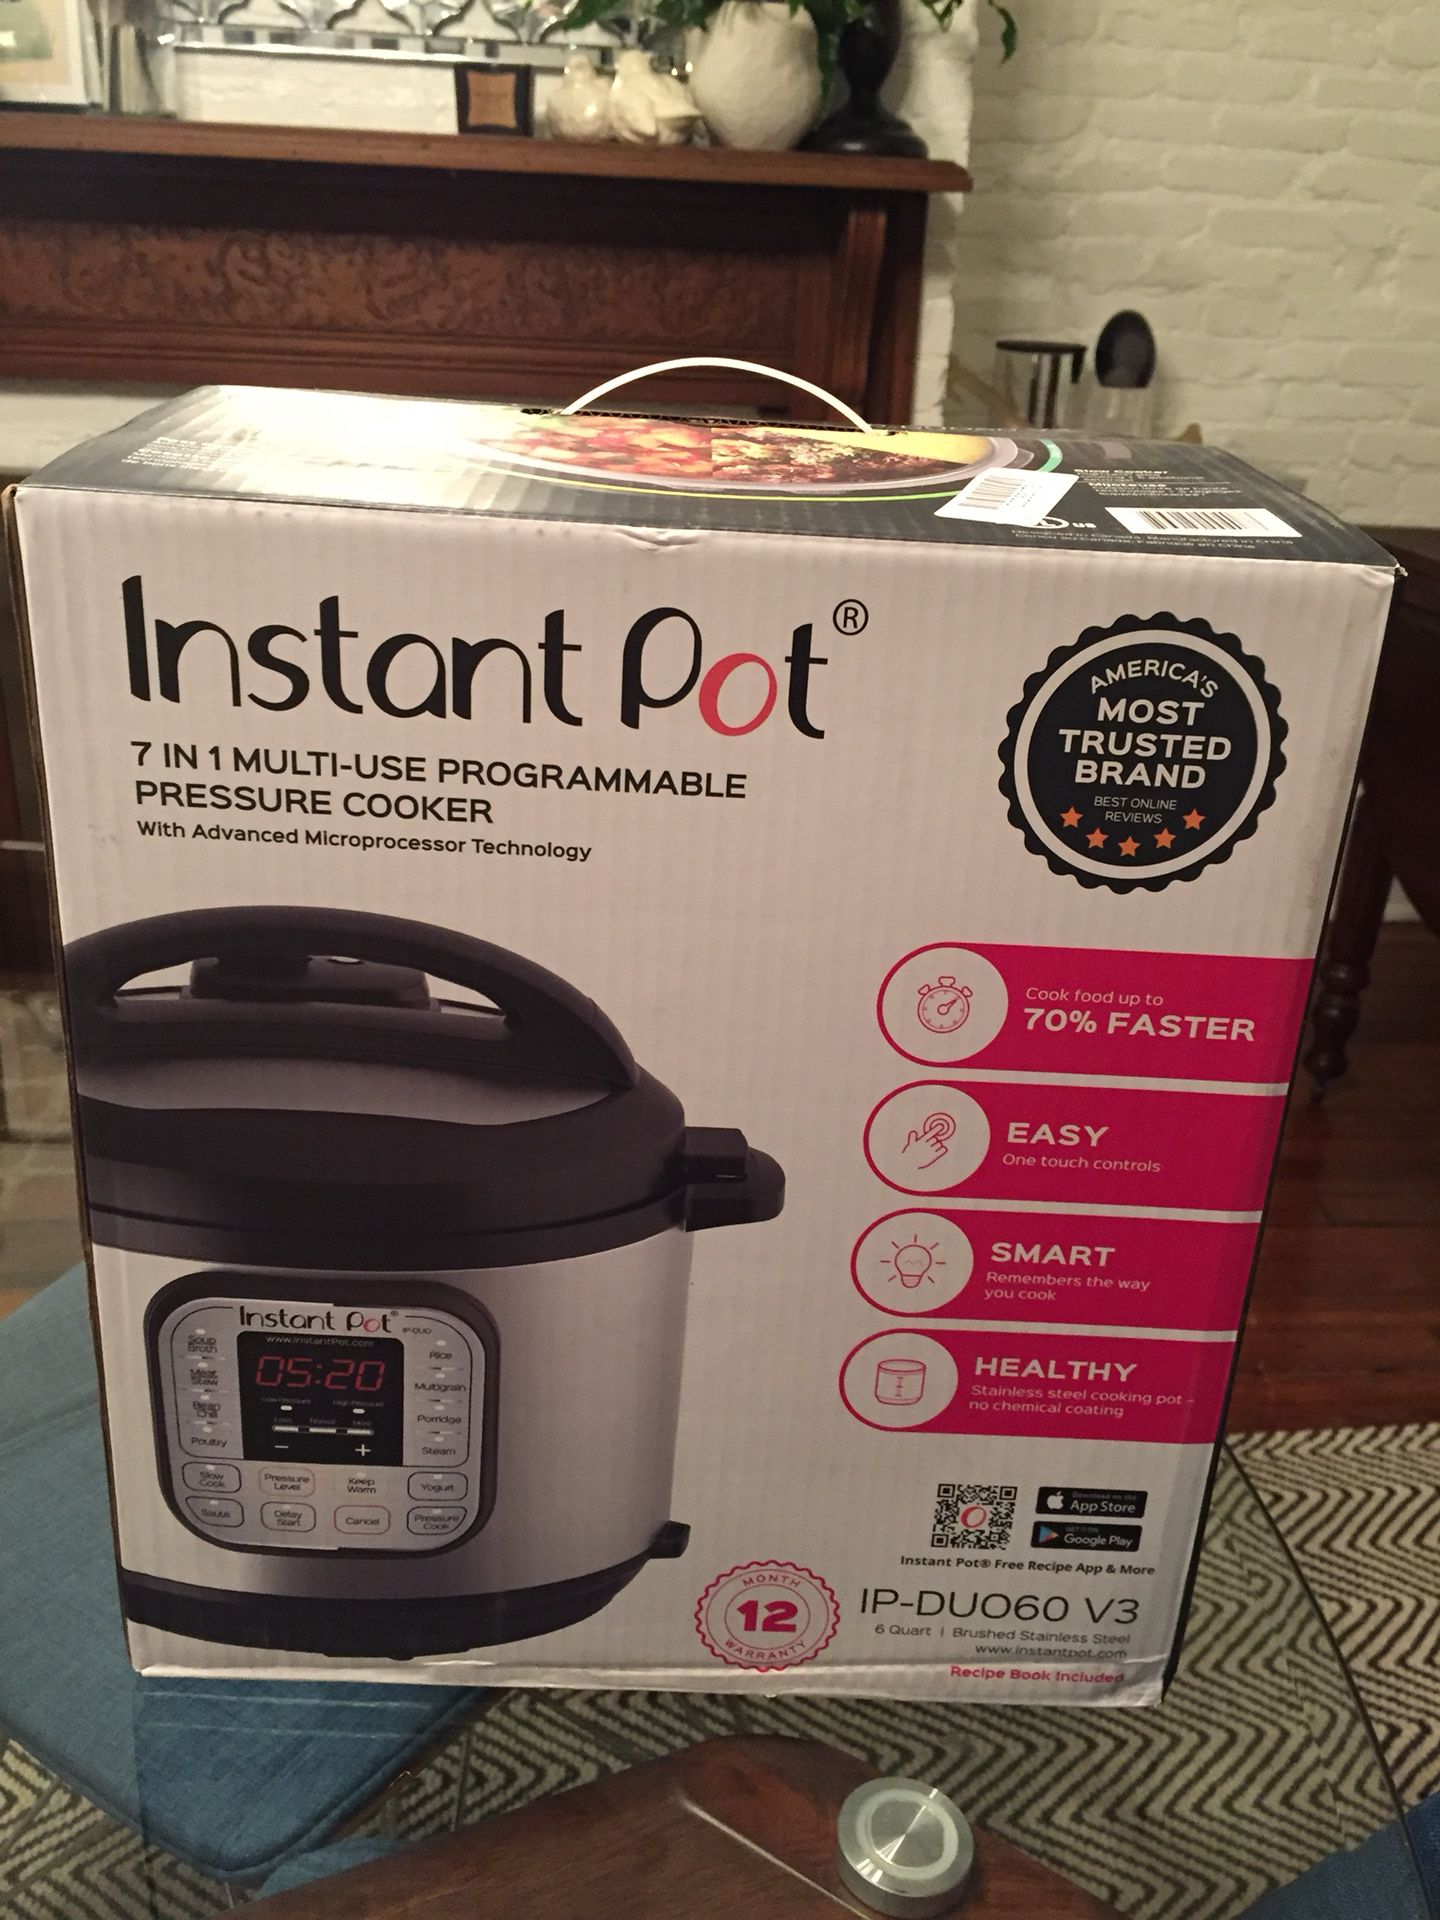 Instant Pot IP-DUO60 7-in-1 Programmable Pressure Cooker with Stainless Steel Cooking Pot and Exterior, 6-Quart/1000-watt, Latest 3rd Generation Tech